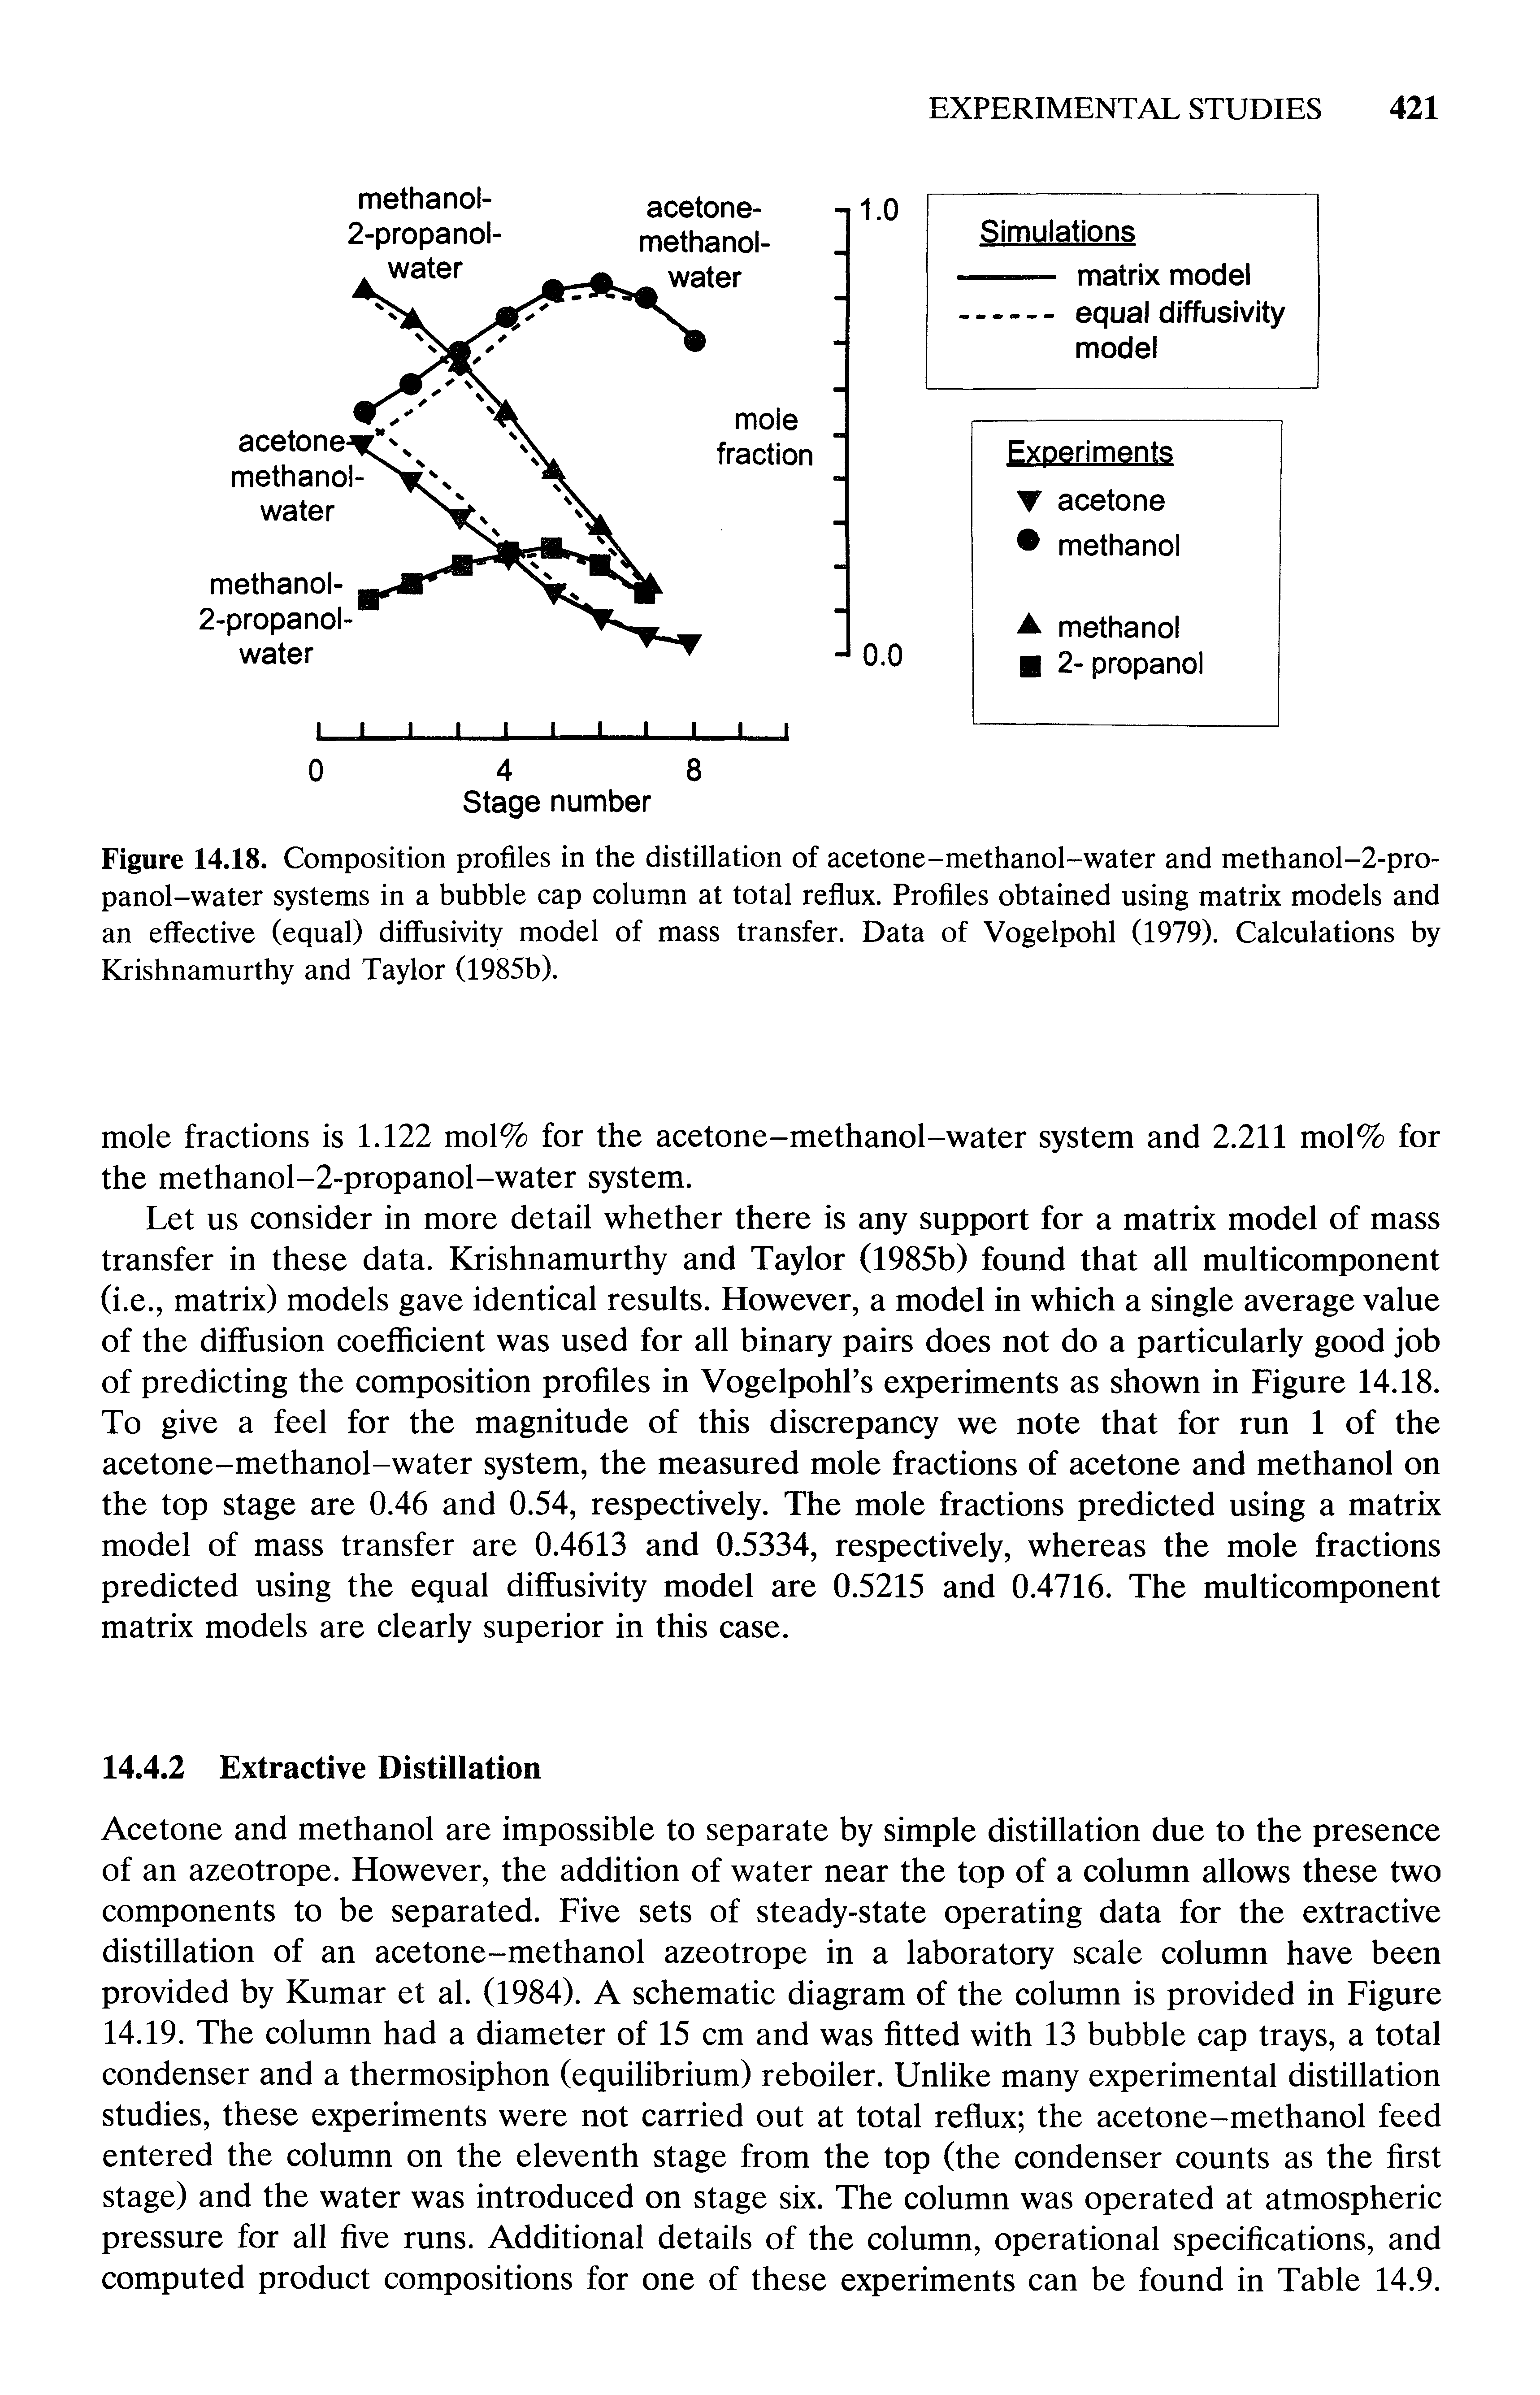 Figure 14.18. Composition profiles in the distillation of acetone-methanol-water and methanol-2-pro-panol-water systems in a bubble cap column at total reflux. Profiles obtained using matrix models and an effective (equal) diffusivity model of mass transfer. Data of Vogelpohl (1979). Calculations by Krishnamurthy and Taylor (1985b).